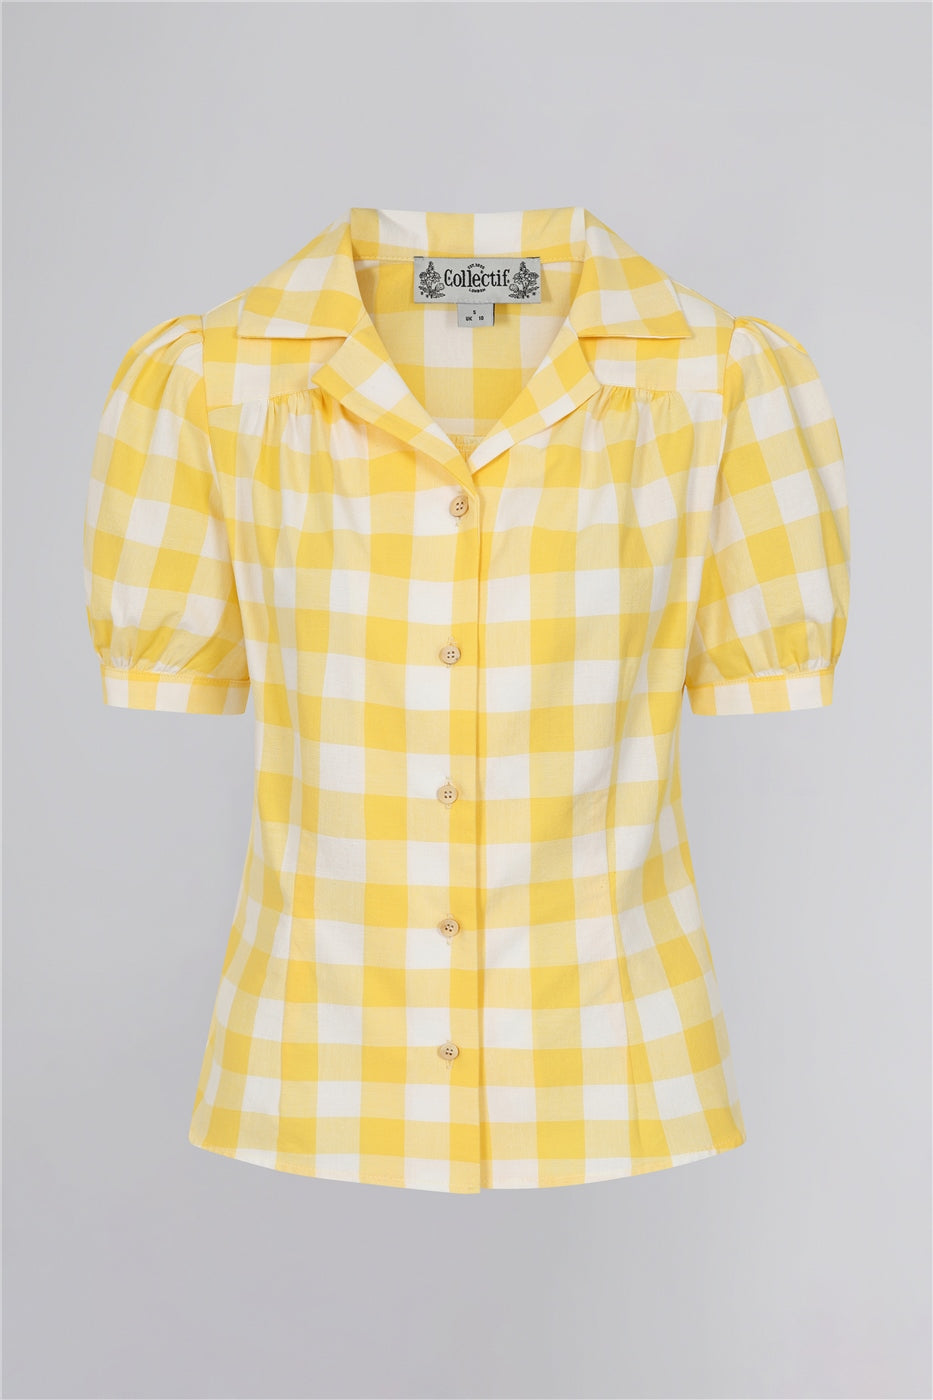 Luana yellow and white gingham shirt by Collectif with short puffed sleeves and button up front.